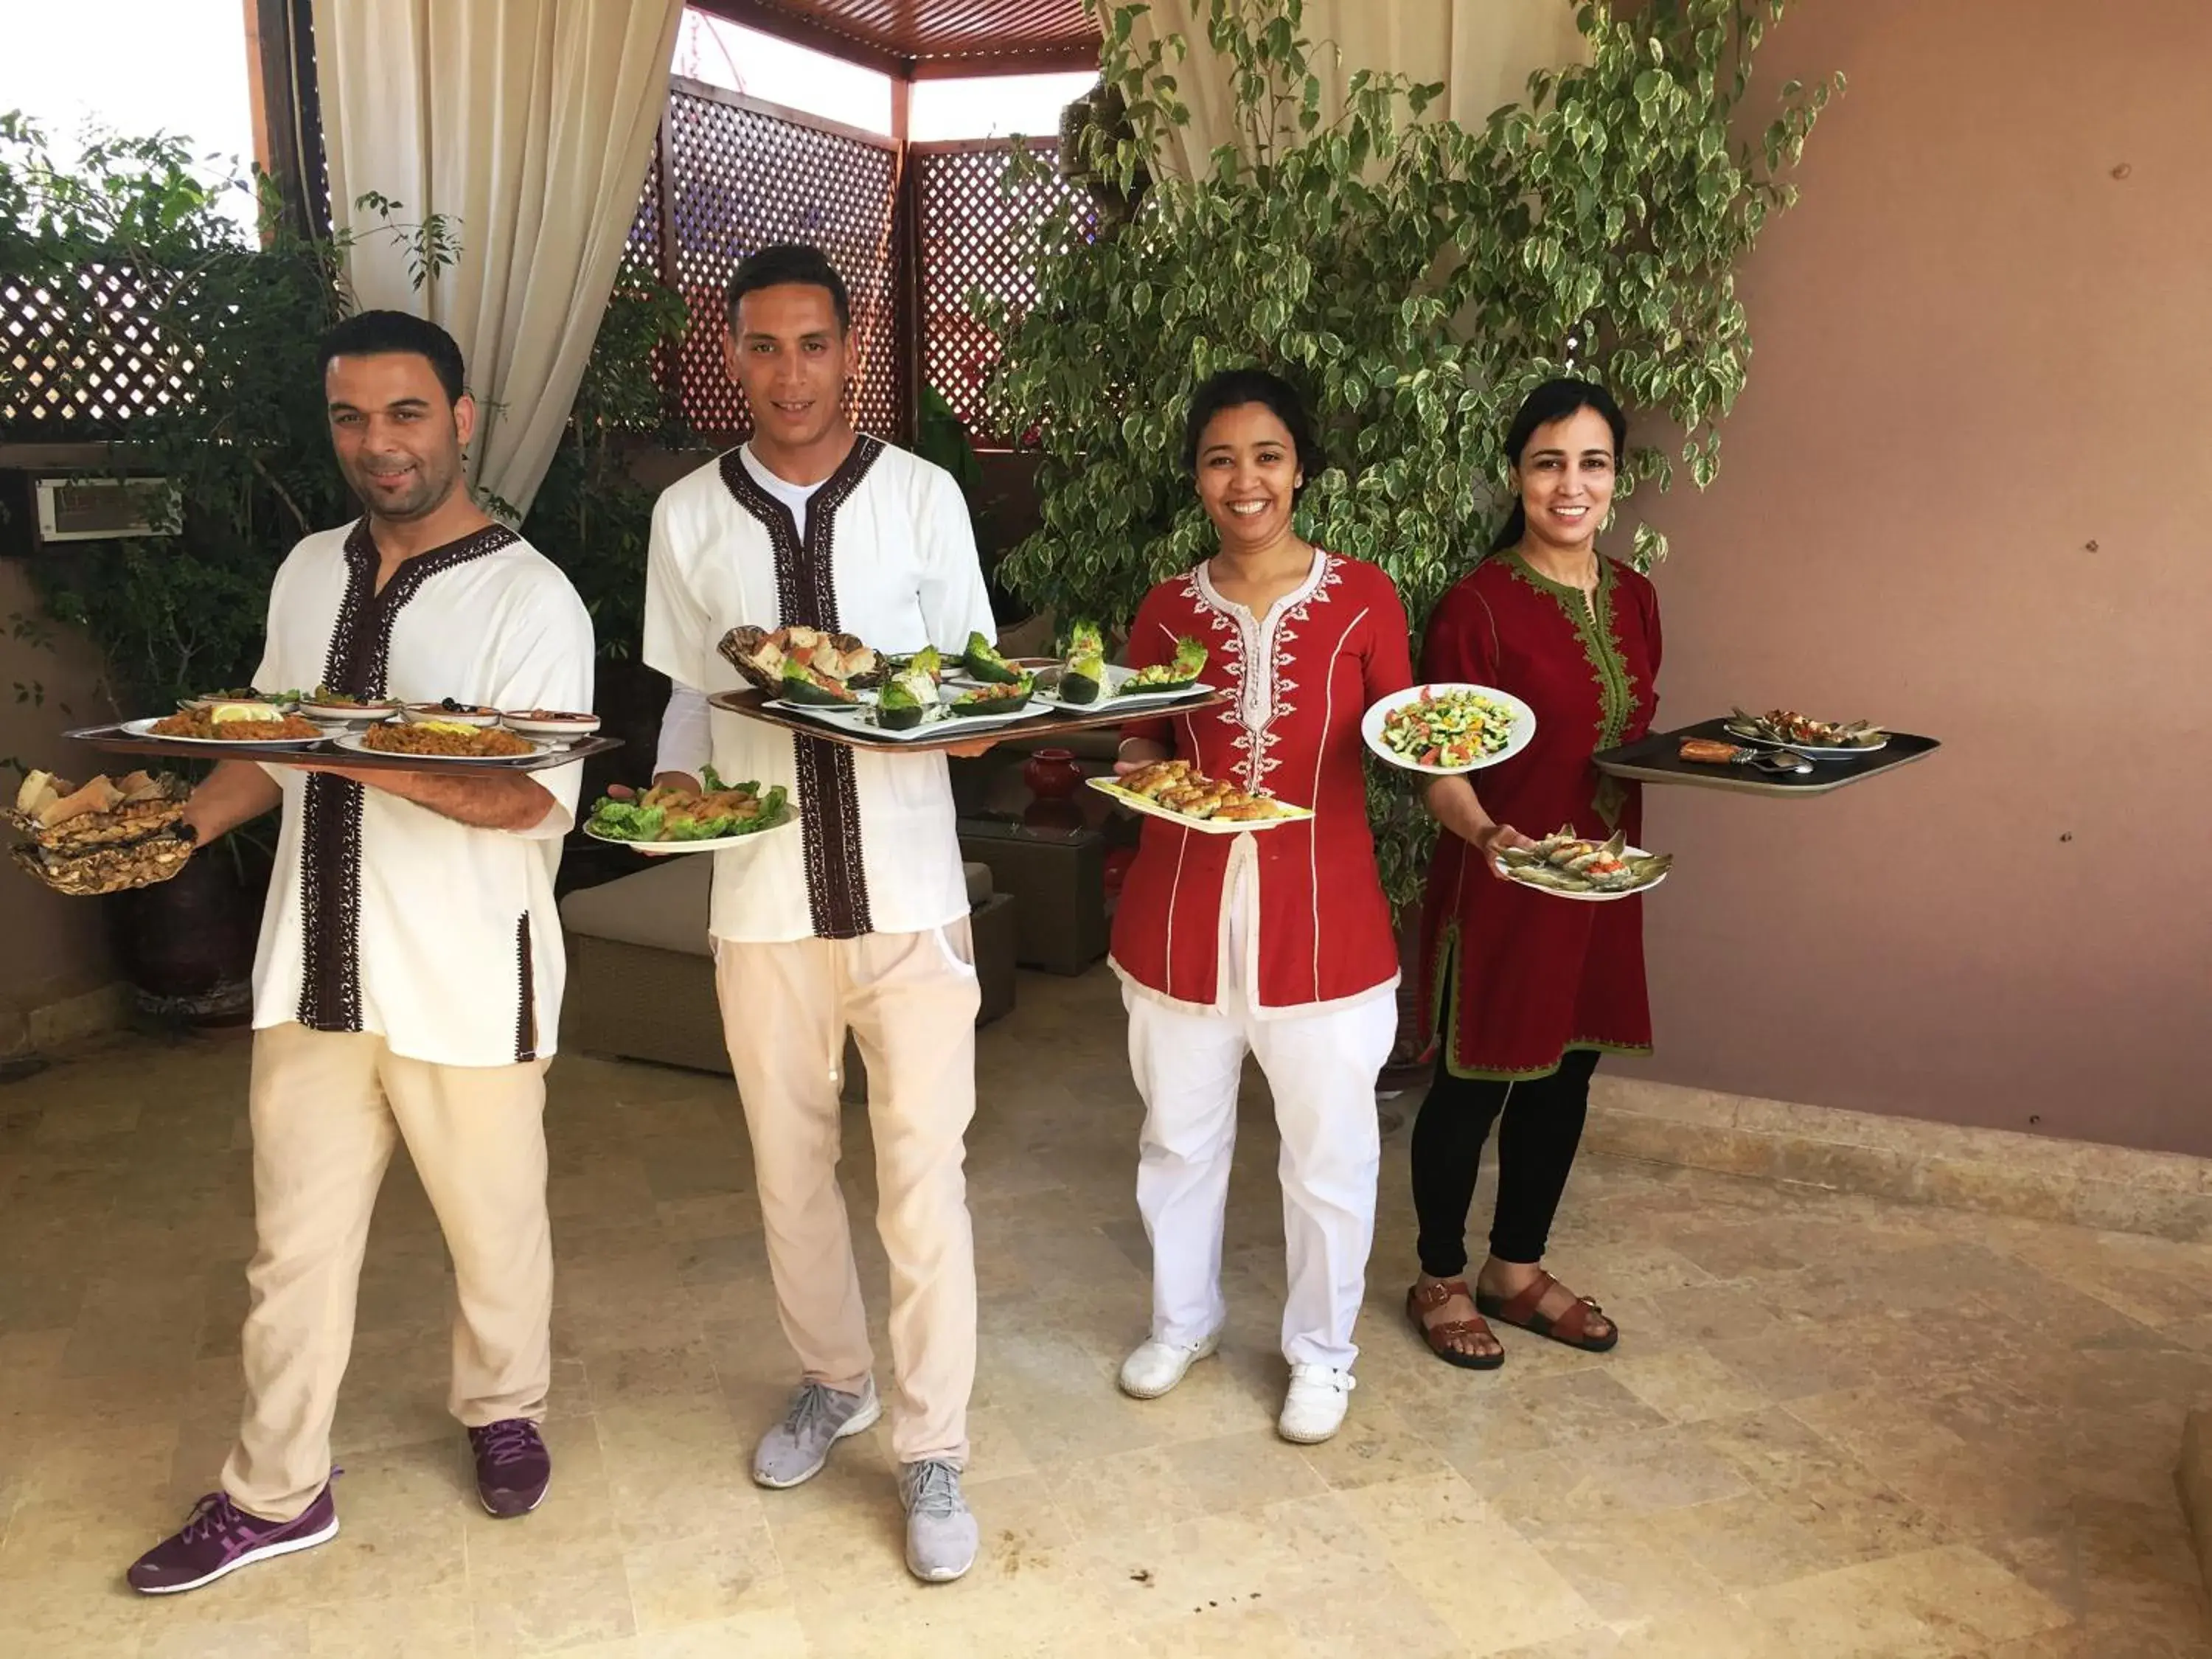 Lunch, Other Activities in Riad Viva